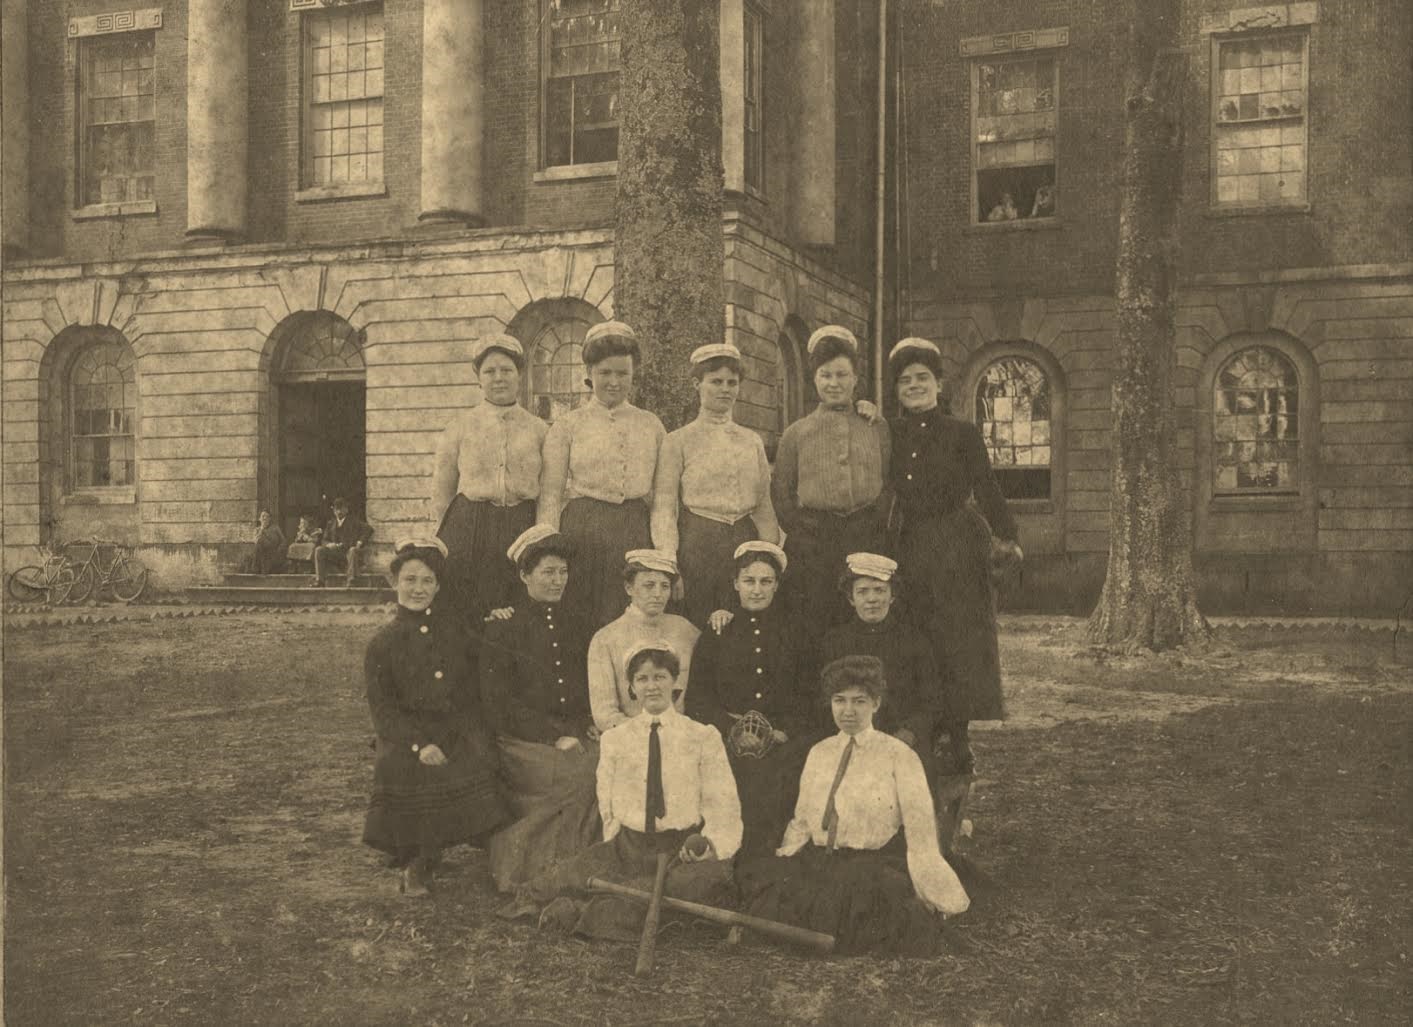 PATRON + Did you know that Alabama college women played baseball as early as 1904? See story for names